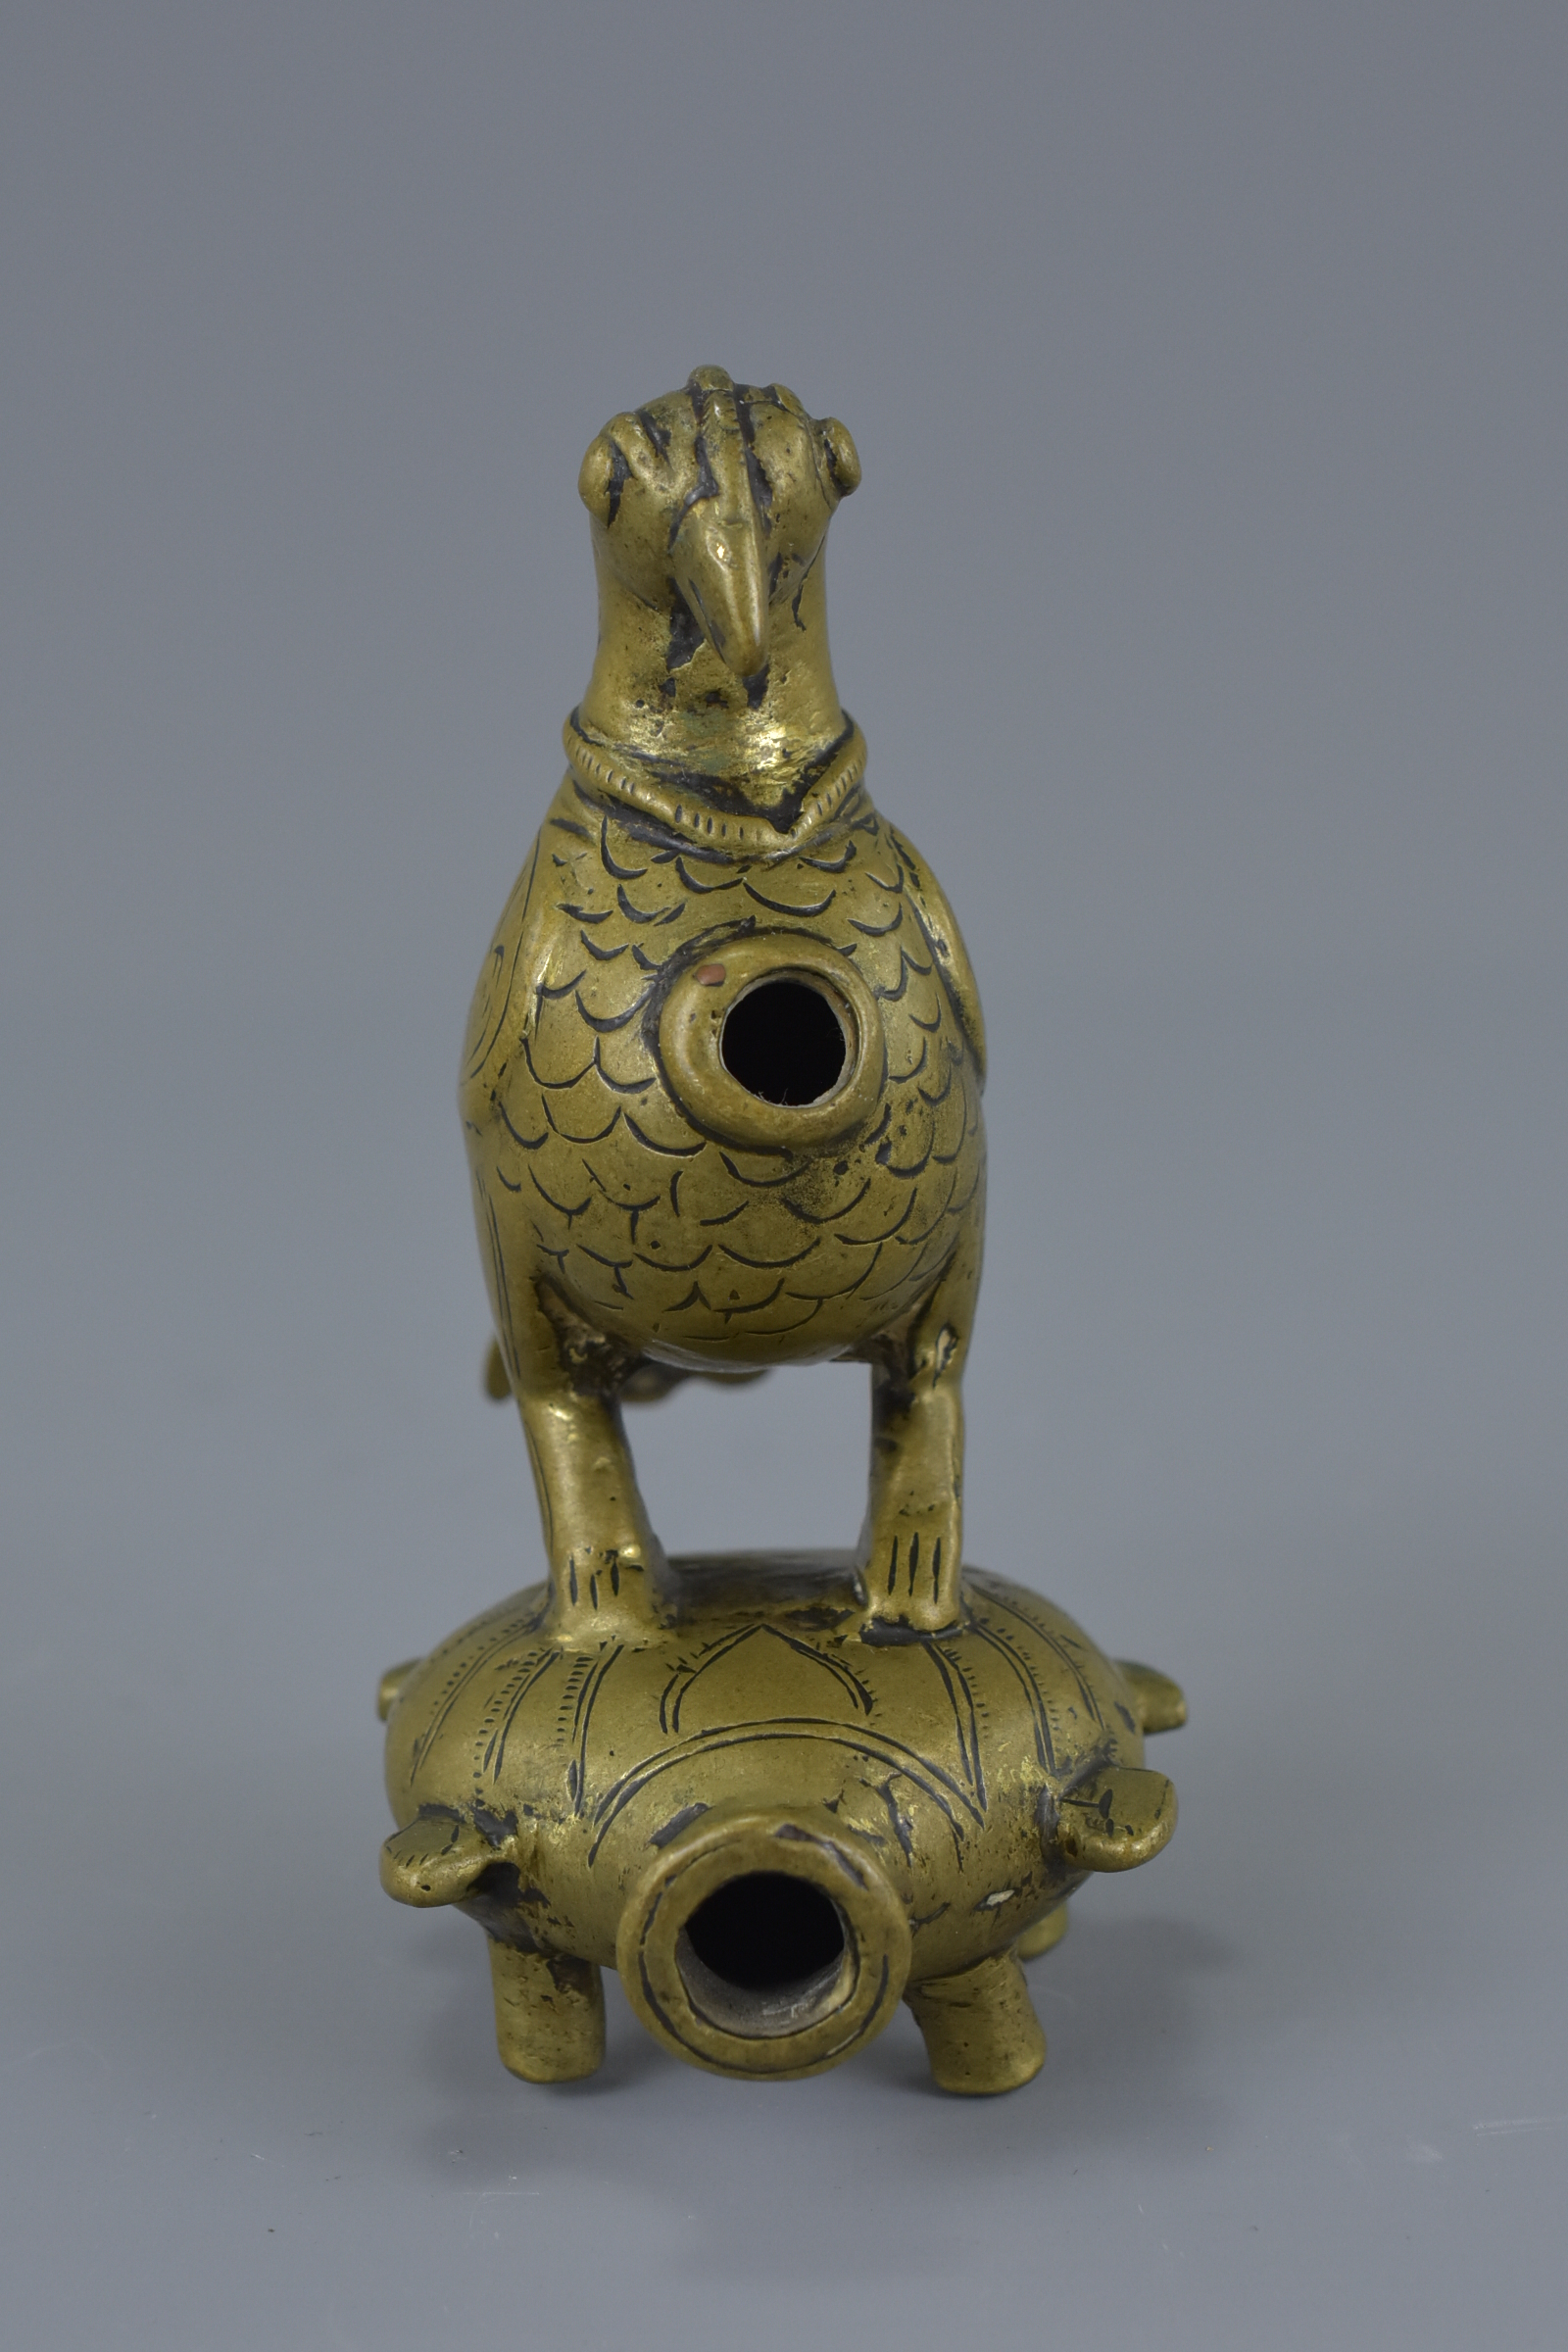 A Middle Eastern bronze fitting in the form of a bird and turtle on for legs. 11cm tall - Image 2 of 5